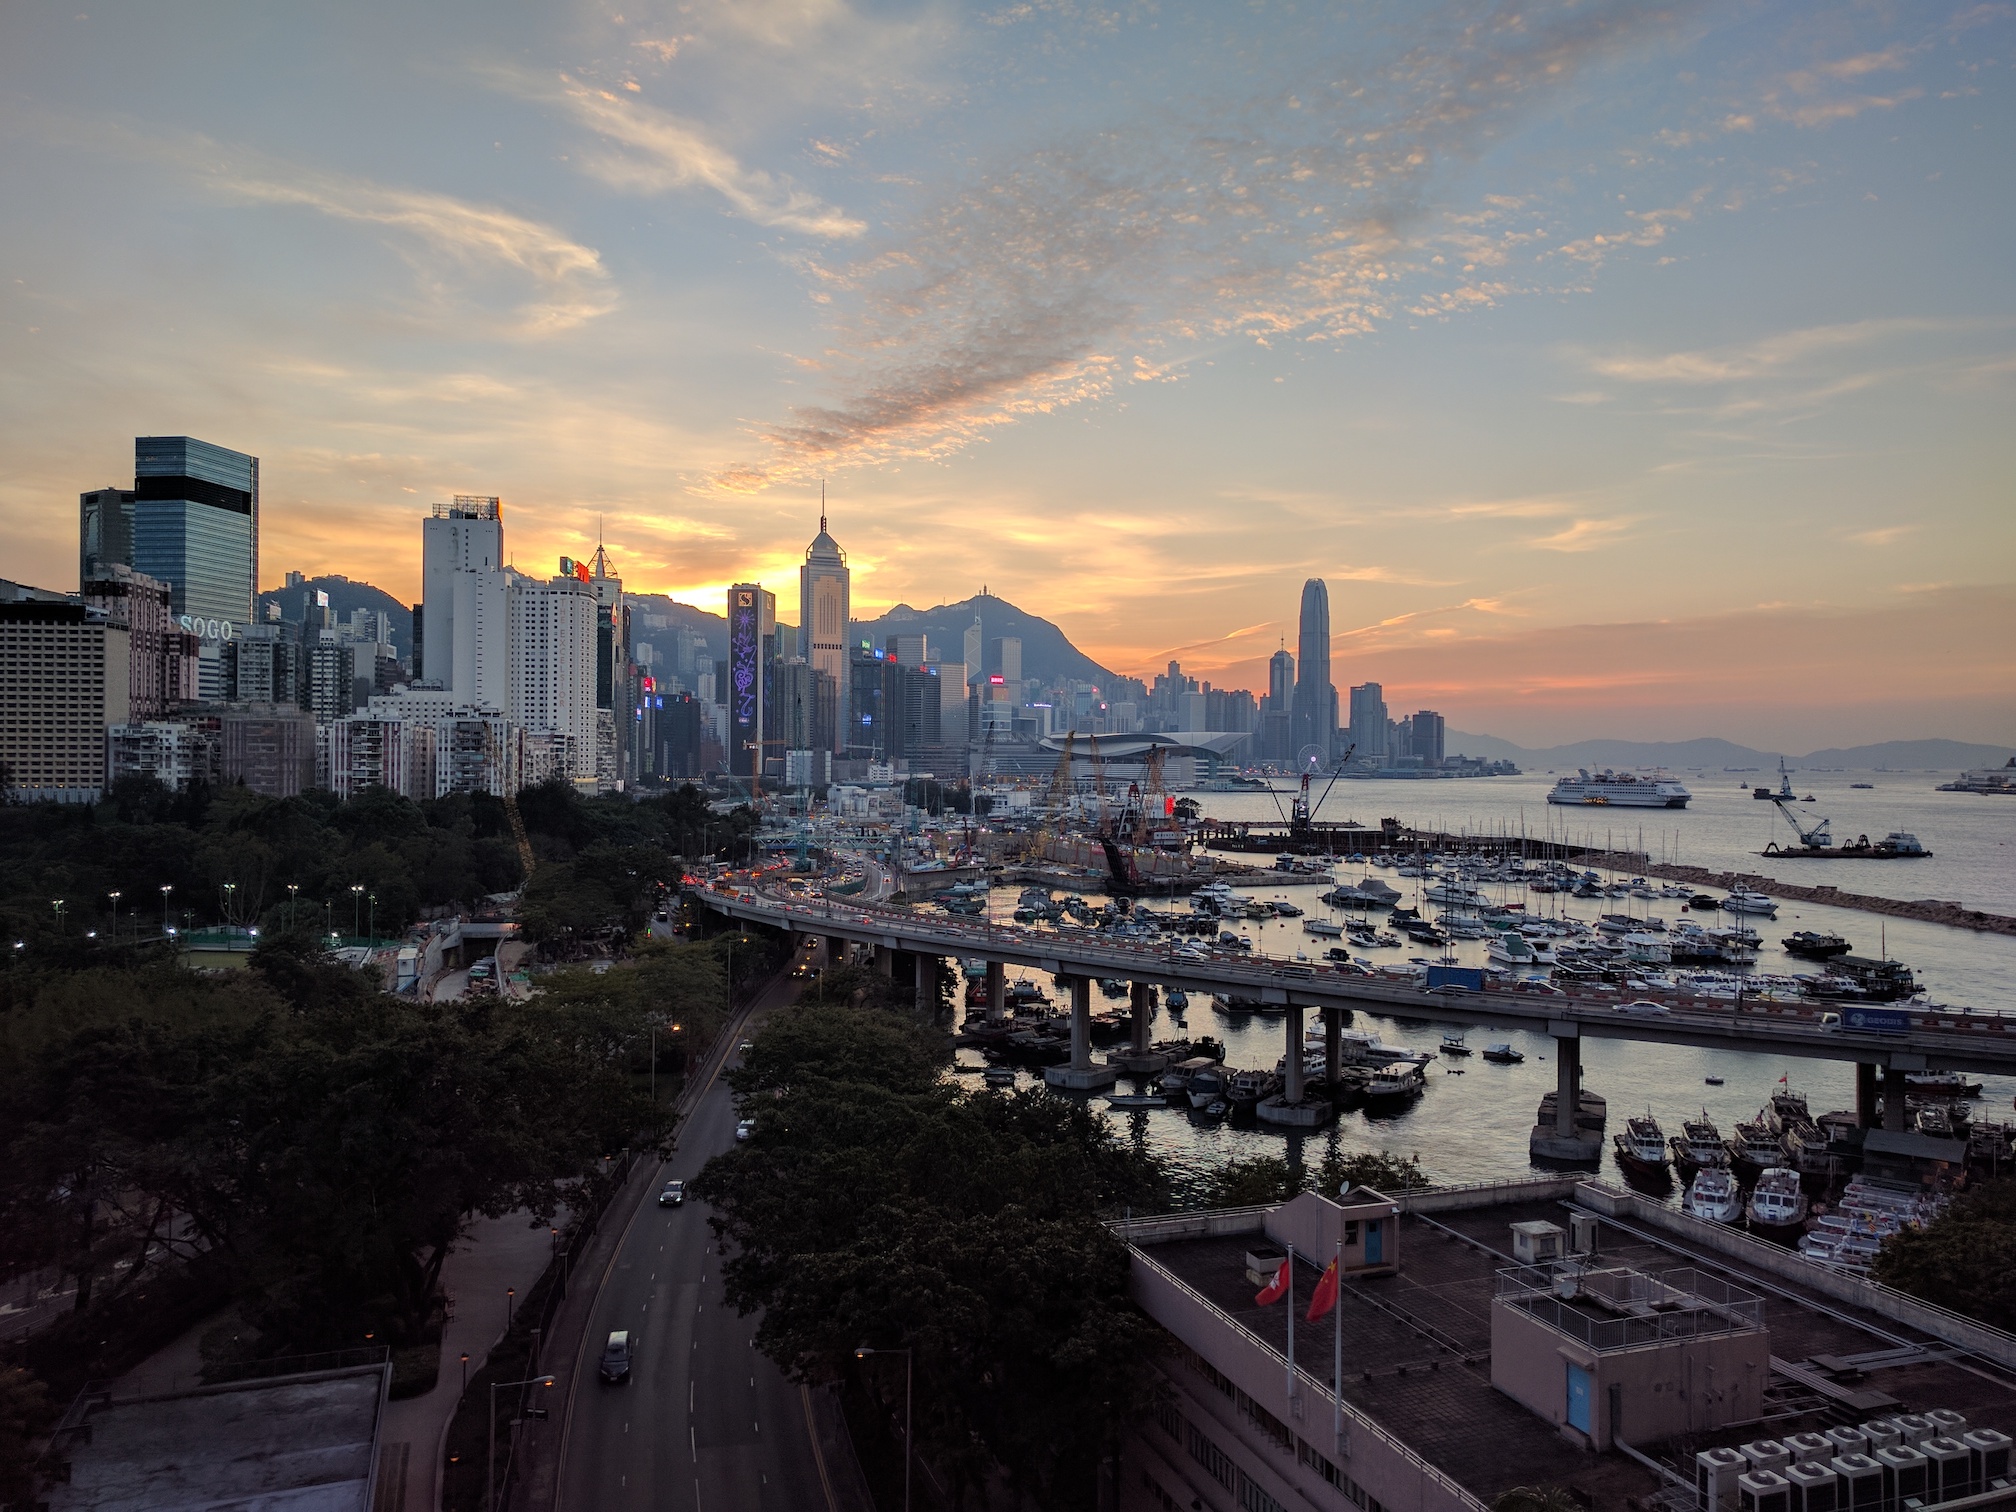 Finishing the day with a beautiful Sunset over Hong Kong Harbour